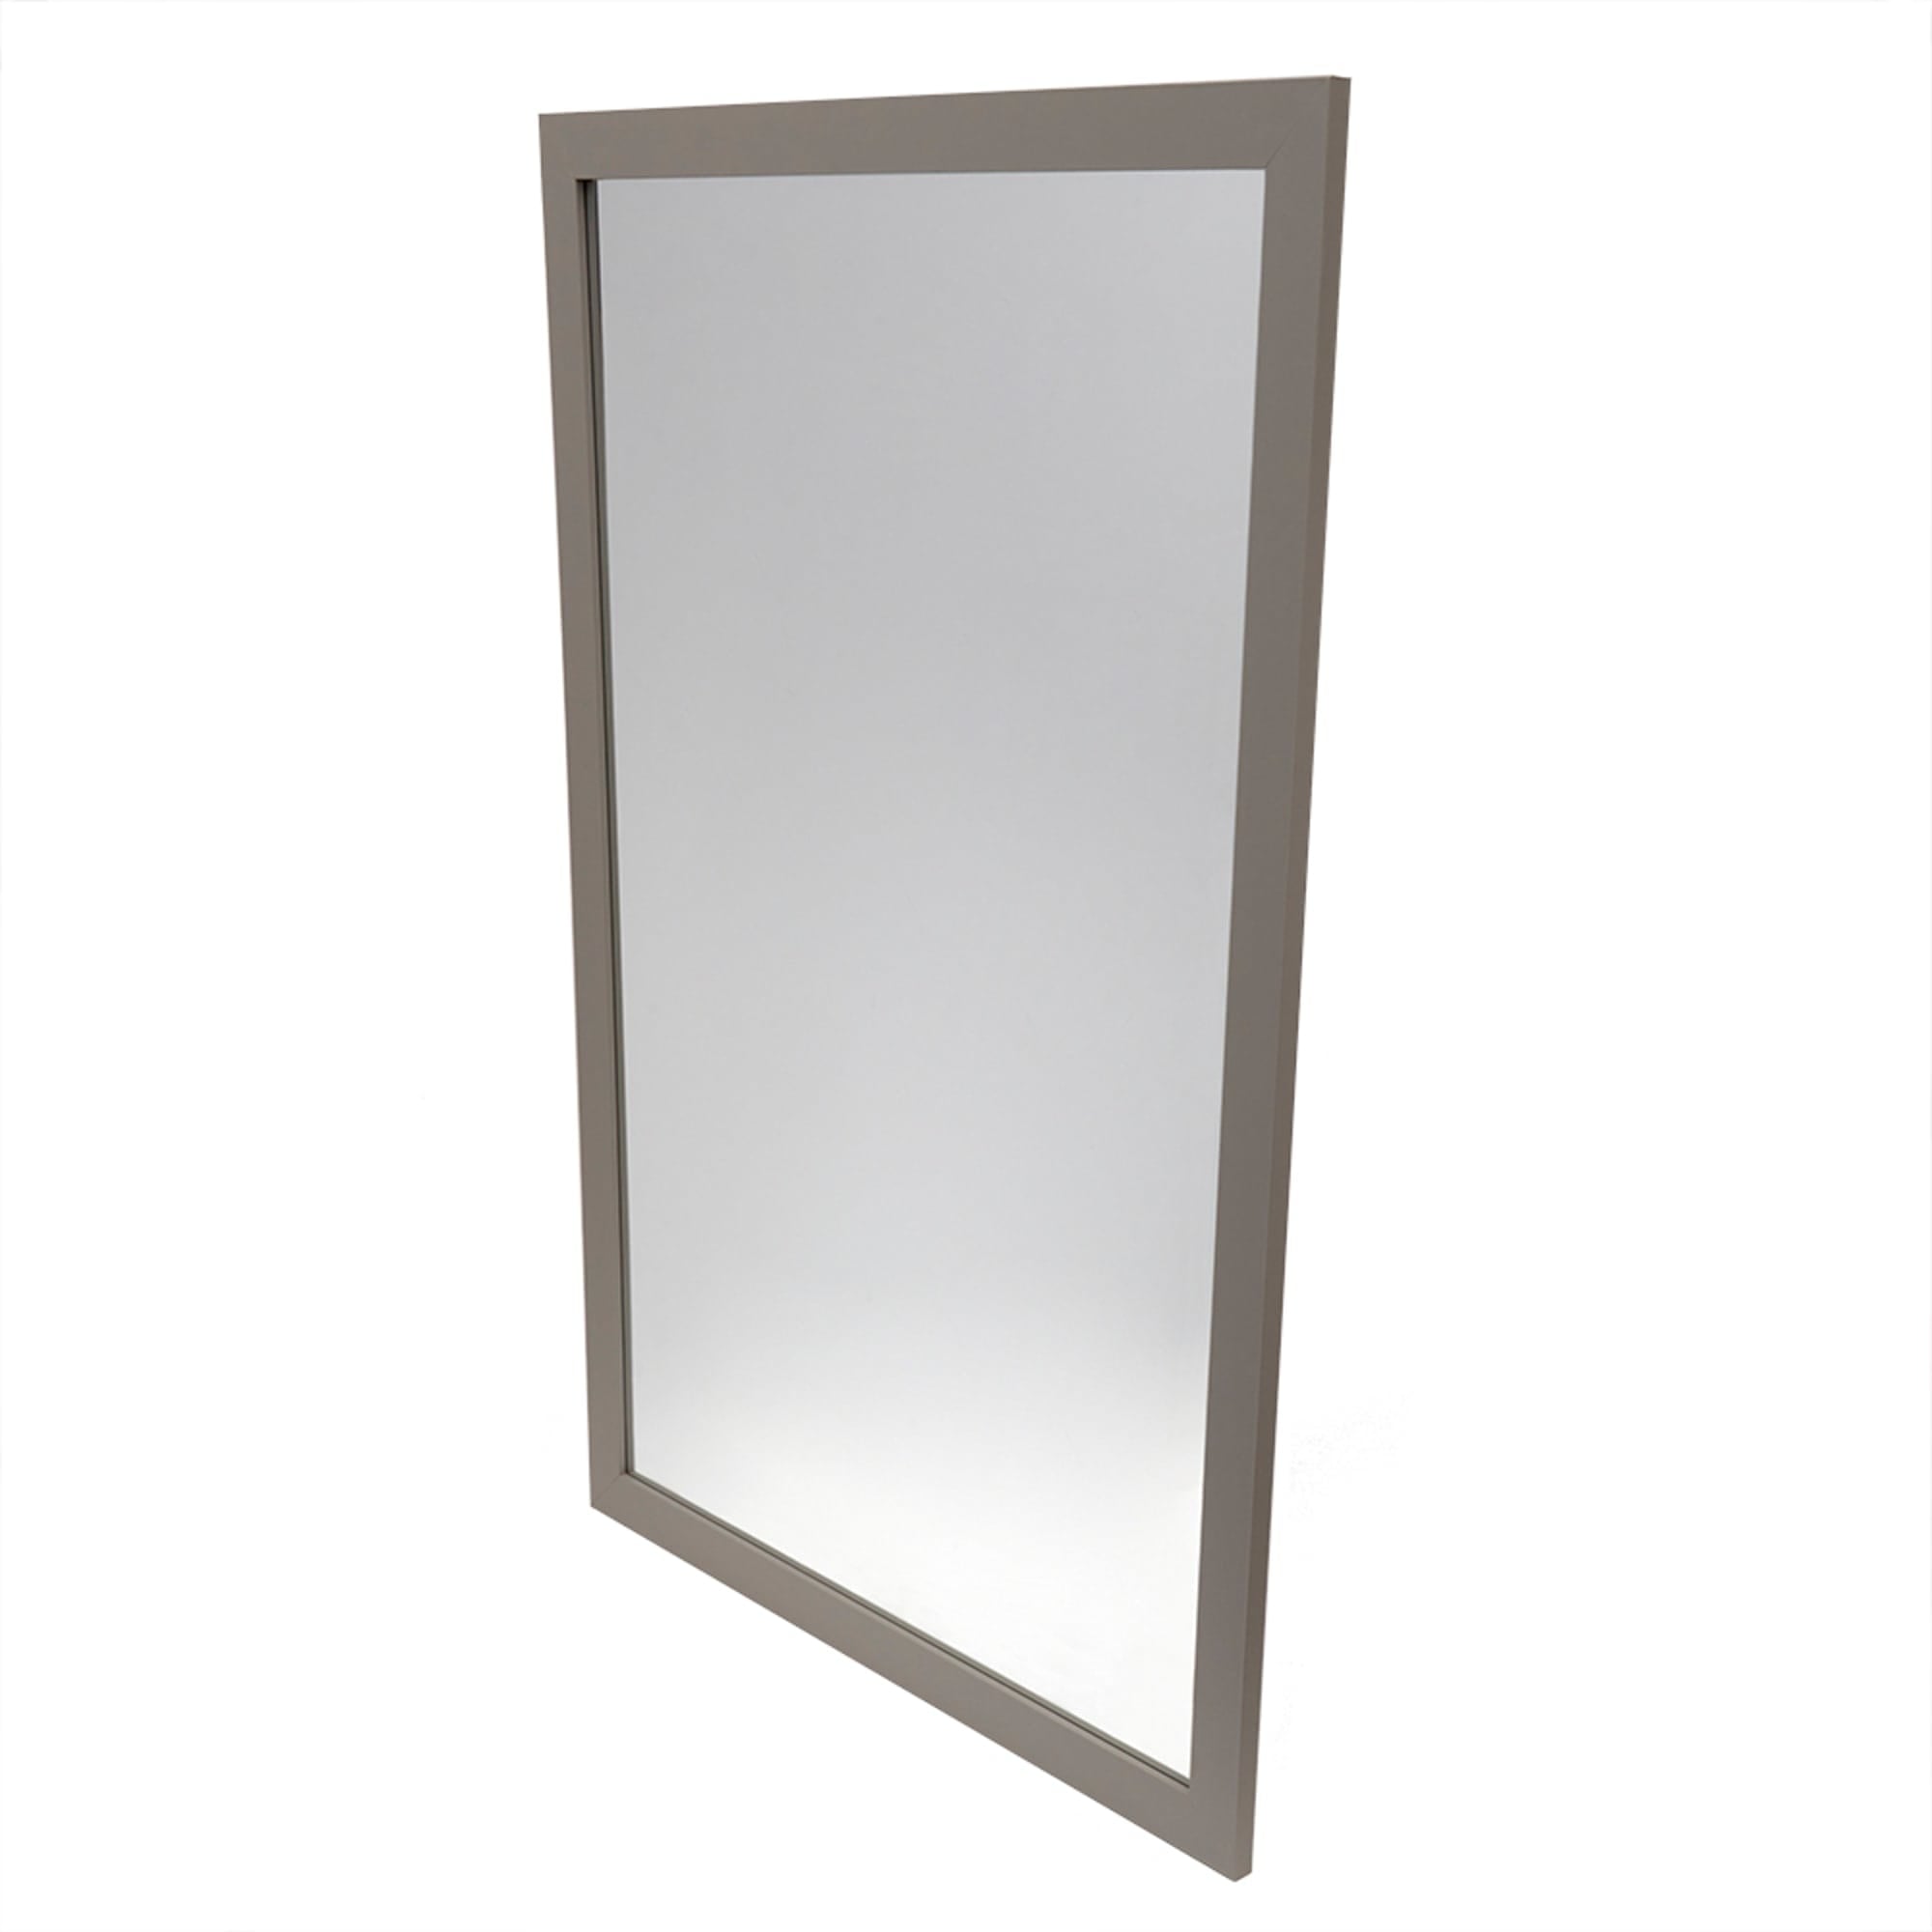 Home Basics 24" x 36" Wall Mirror, Grey $25.00 EACH, CASE PACK OF 4